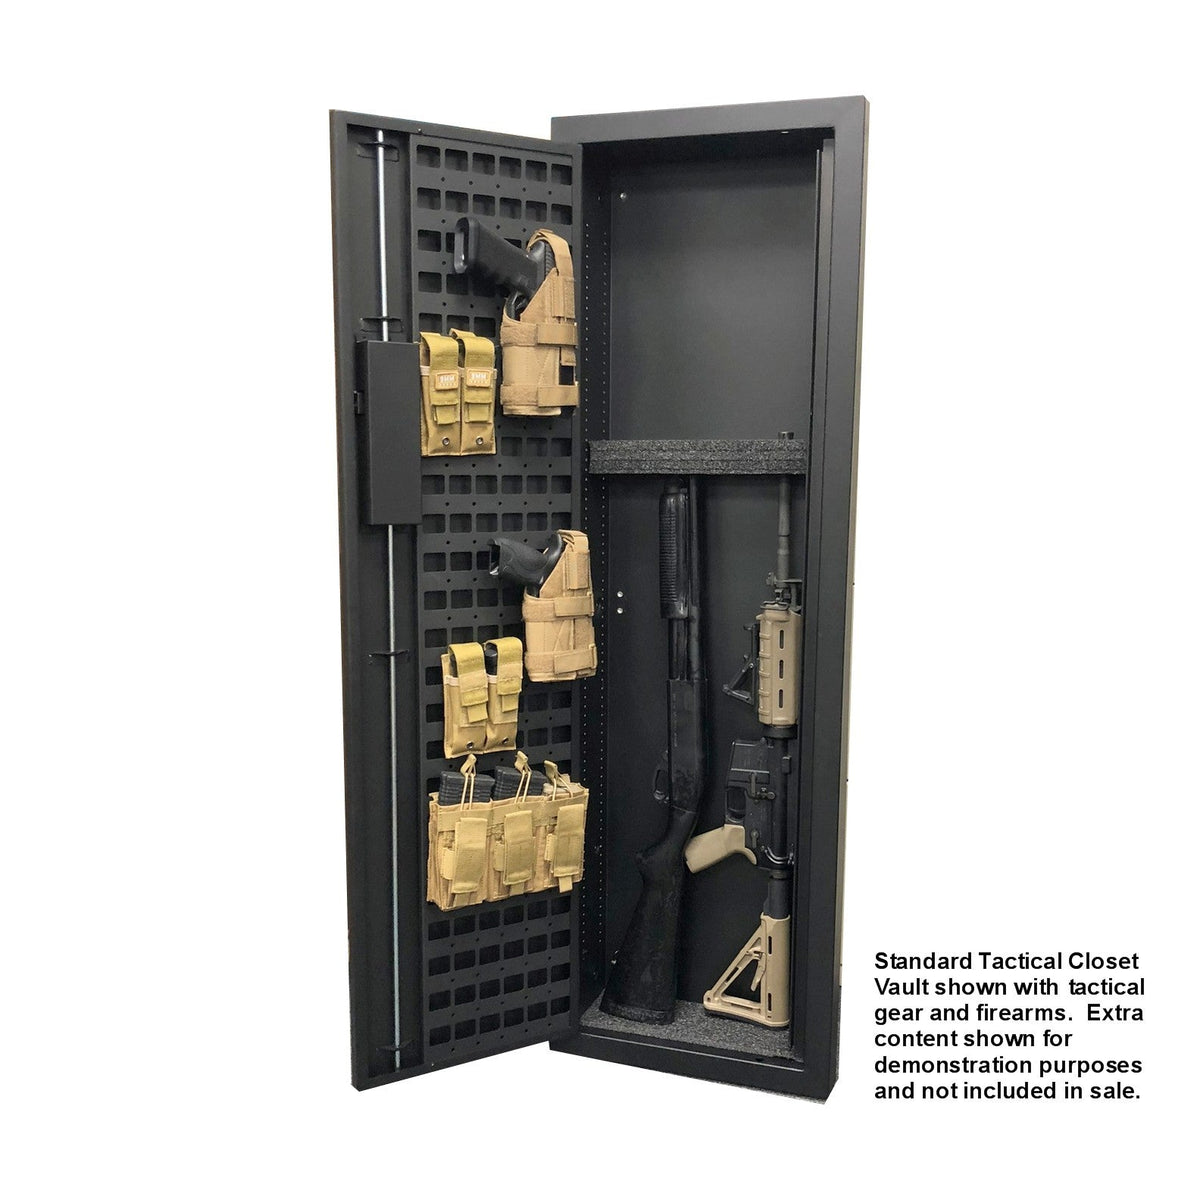 V-Line Tactical Closet Vault In-Wall Safe 51653-S FBLK Shown with Tactical Gear and Firearms